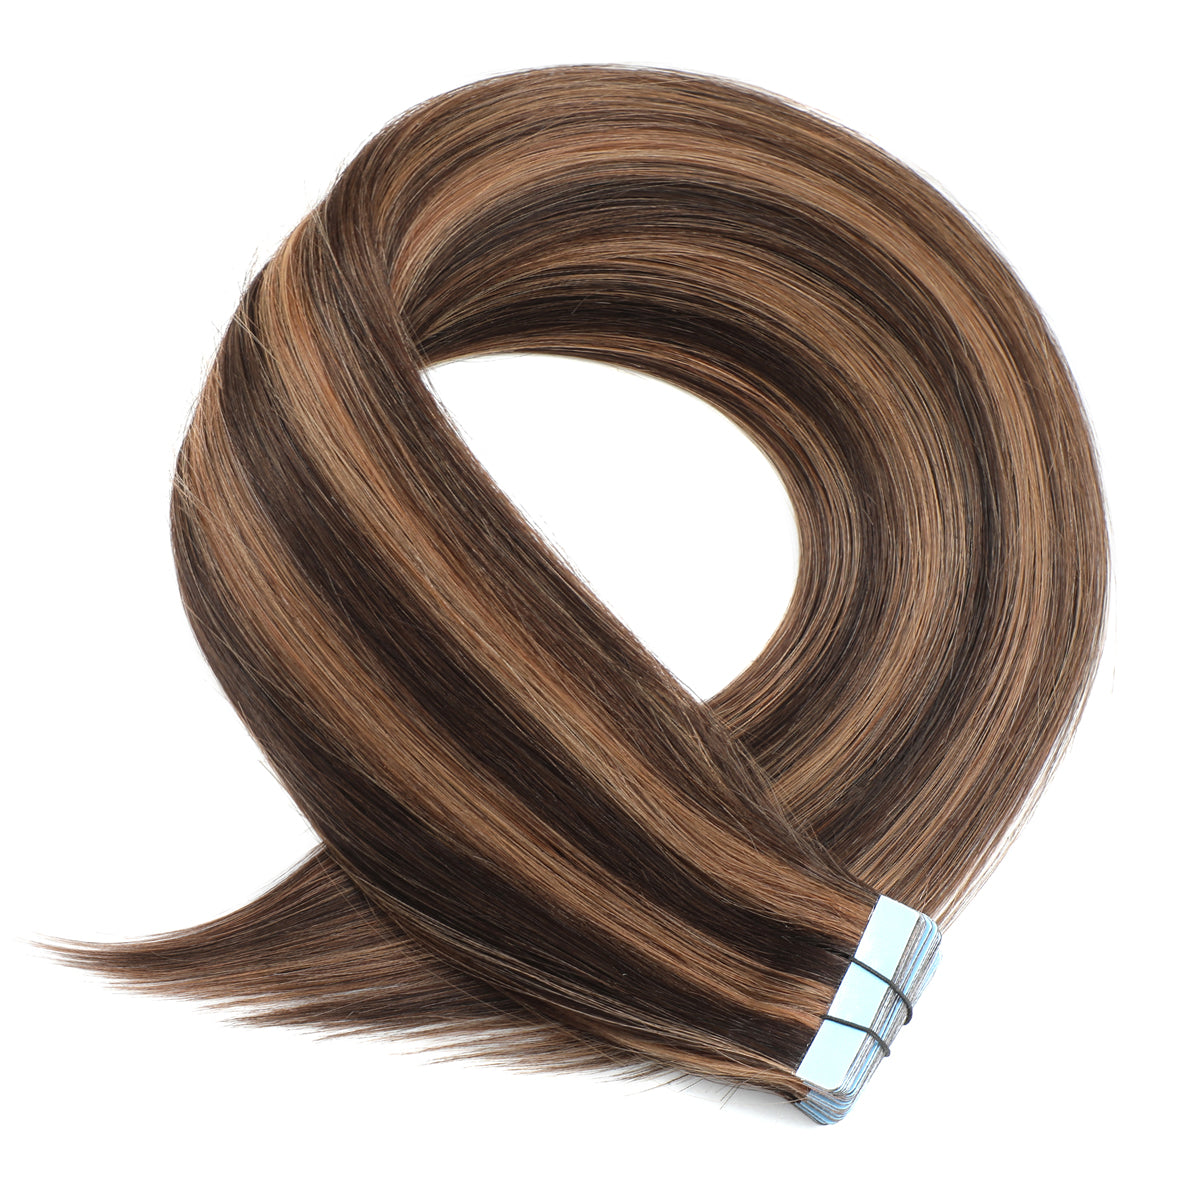 Tape-in Hair Extensions offer a flawless blend with your natural hair, adding length and volume. These high-quality human hair extensions ensure a seamless and natural look.